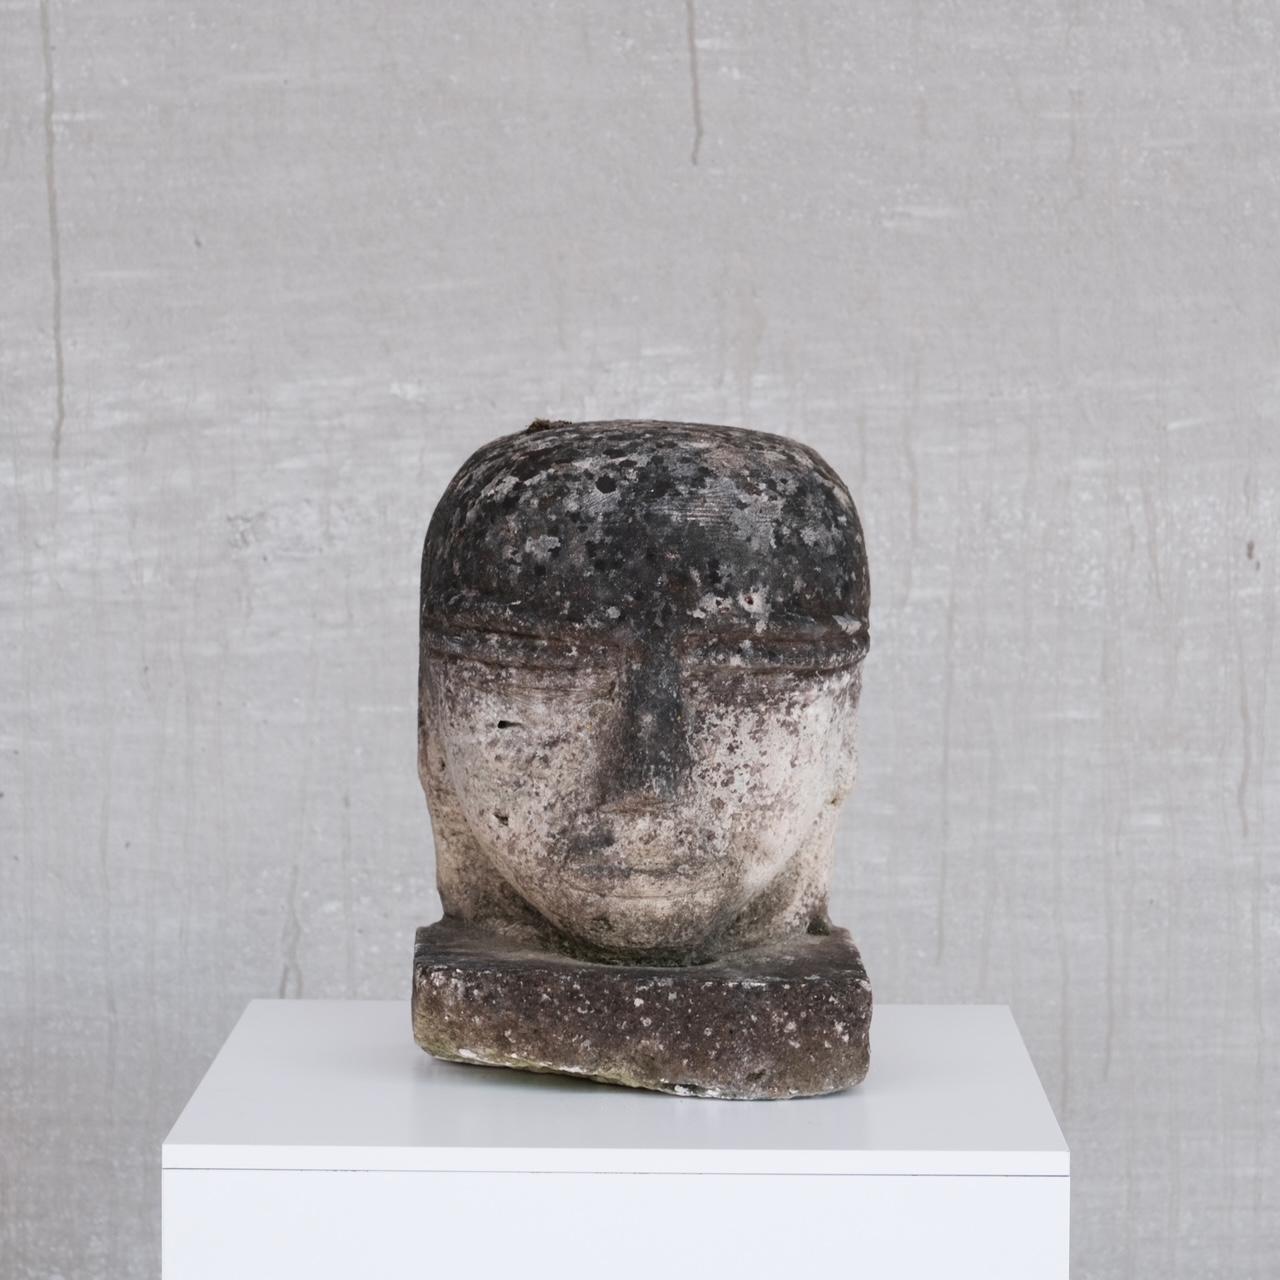 An unusual artist carved stone head. 

France, c1920s. 

One of a pair sold individually. 

Location: Belgium Gallery. 

Dimensions: 35 H x 18 D x 24 W in cm. 

Delivery: POA

We can ship around the world. Can be transferred to our